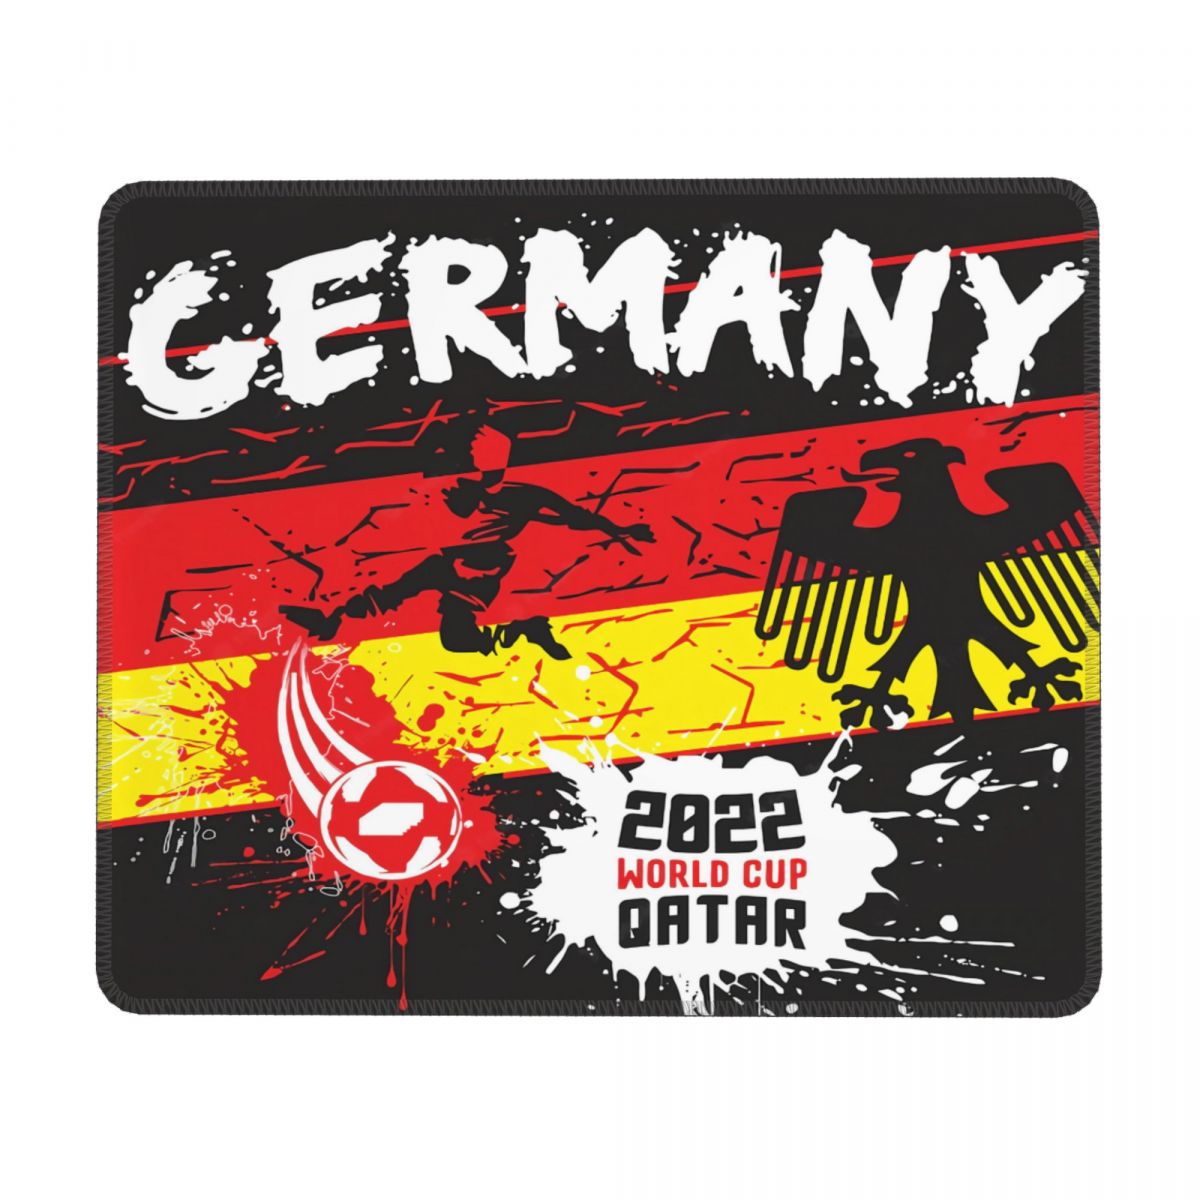 Germany 2022 Qatar World Cup Square Rubber Base MousePads